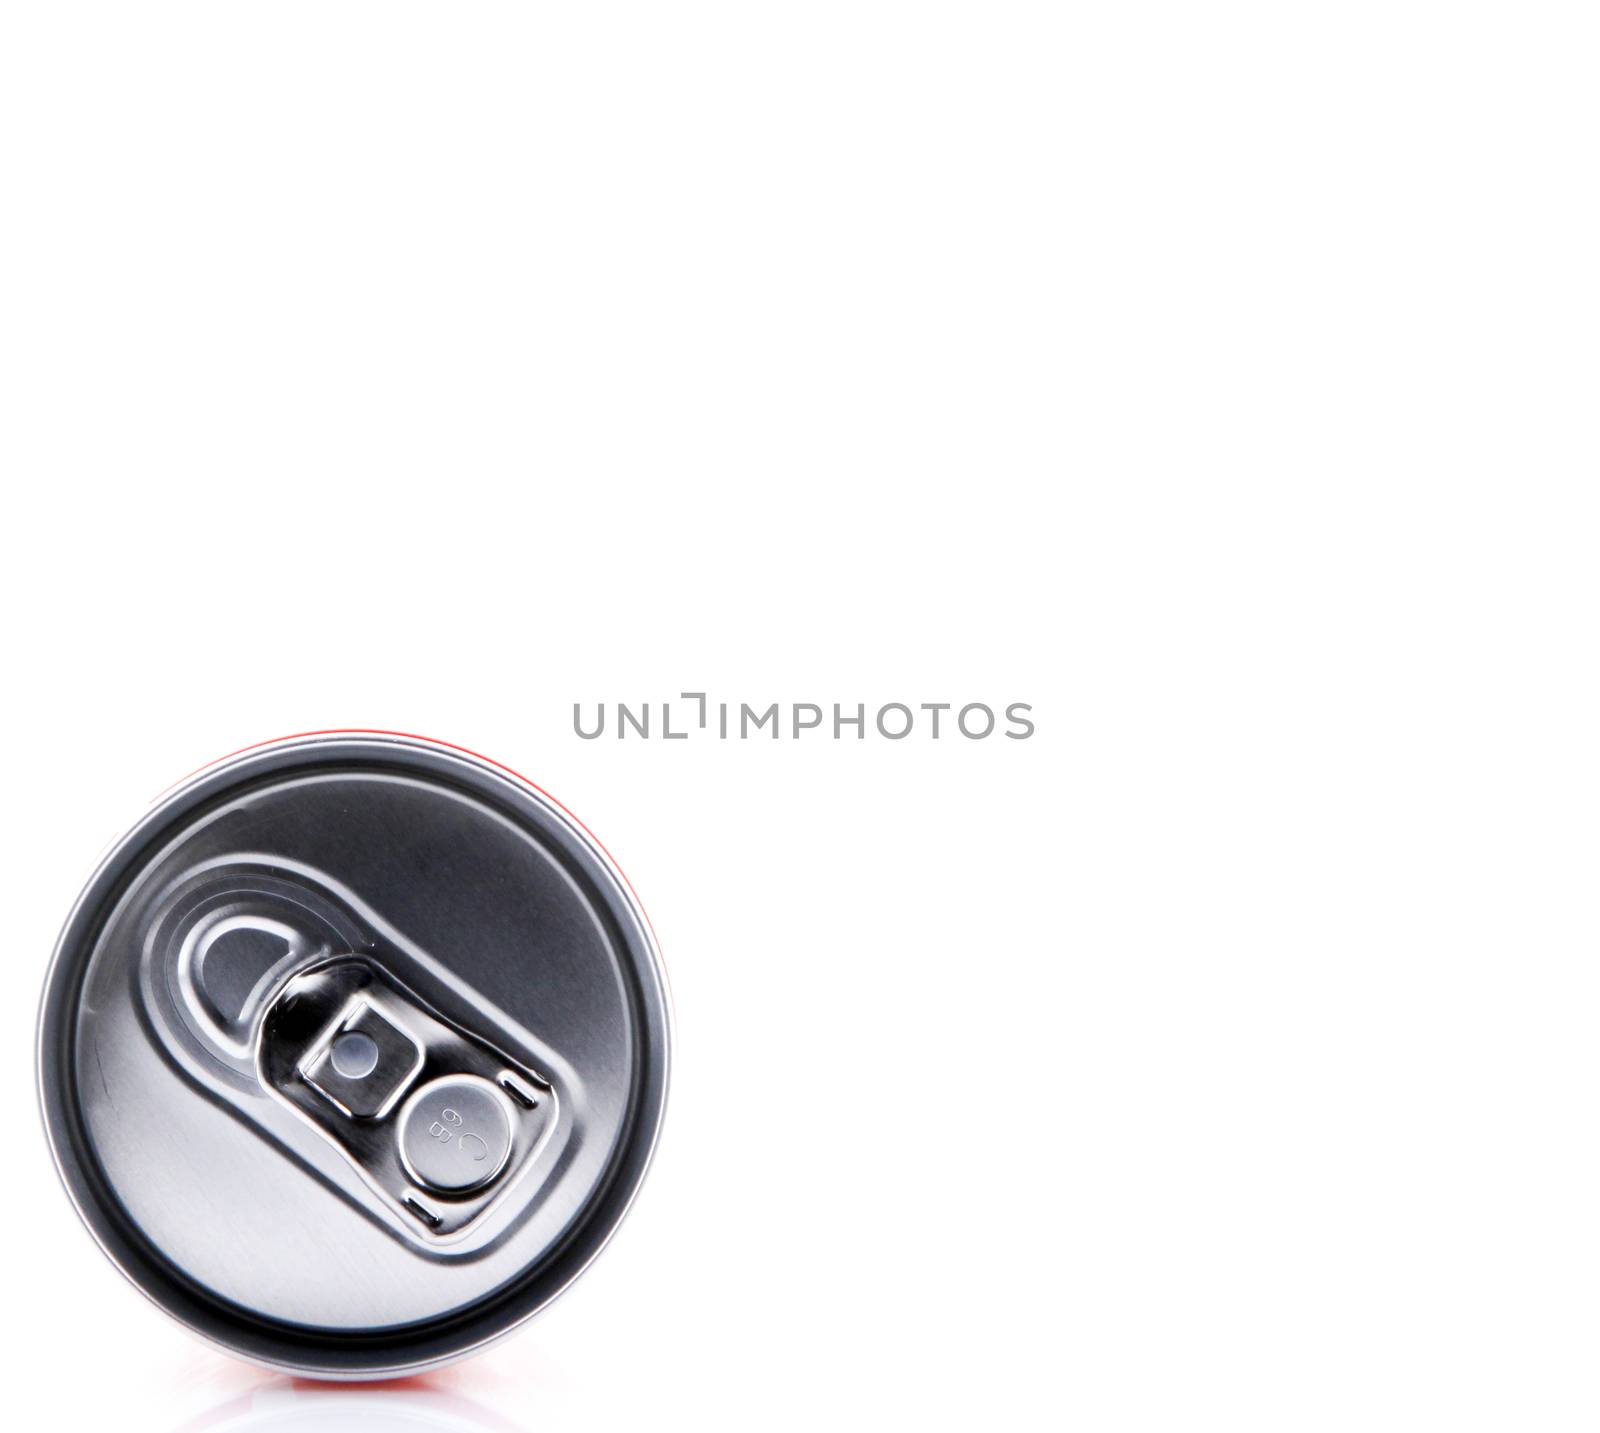 AYTOS, BULGARIA - JANUARY 25, 2014: Red Bull can isolated on white background. Red Bull is an energy drink sold by Austrian company Red Bull GmbH, created in 1987.